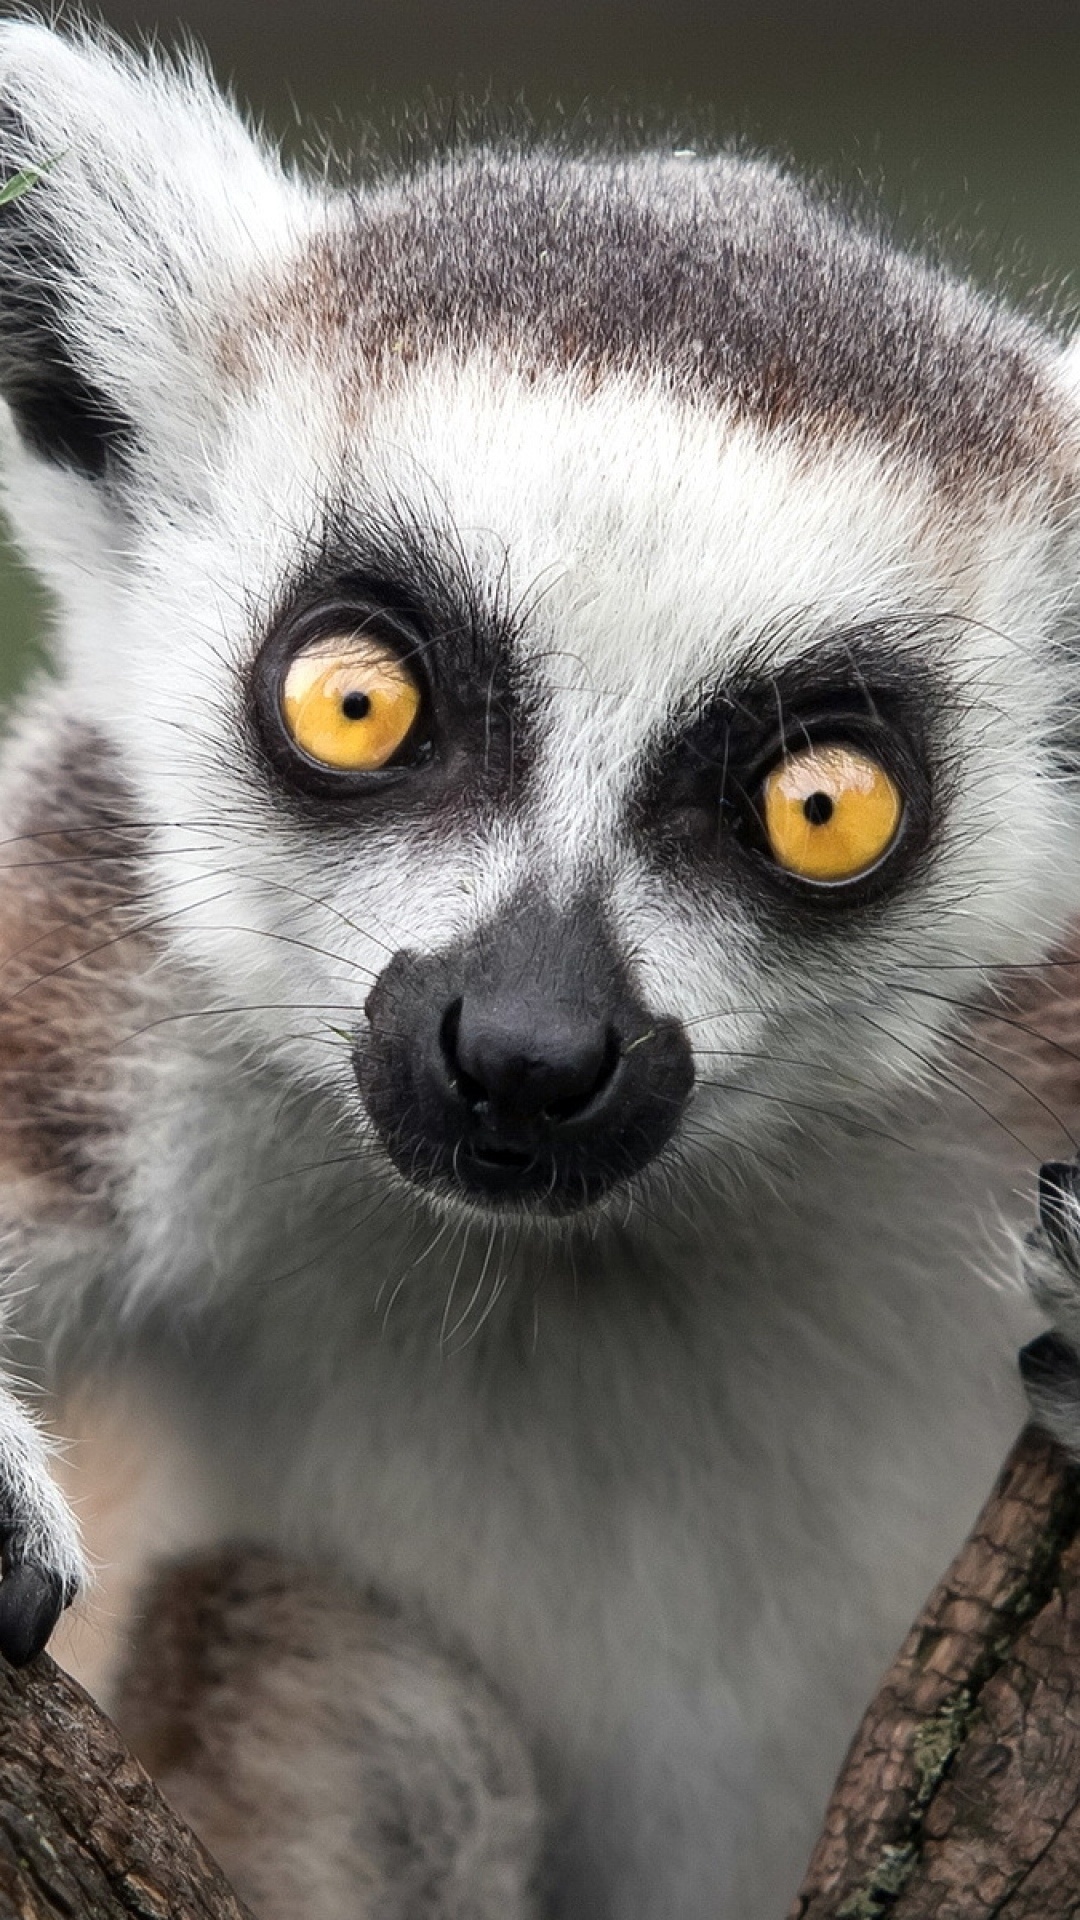 Lemur wallpaper collection, Nature backgrounds, Primate images, Wildlife, 1080x1920 Full HD Phone